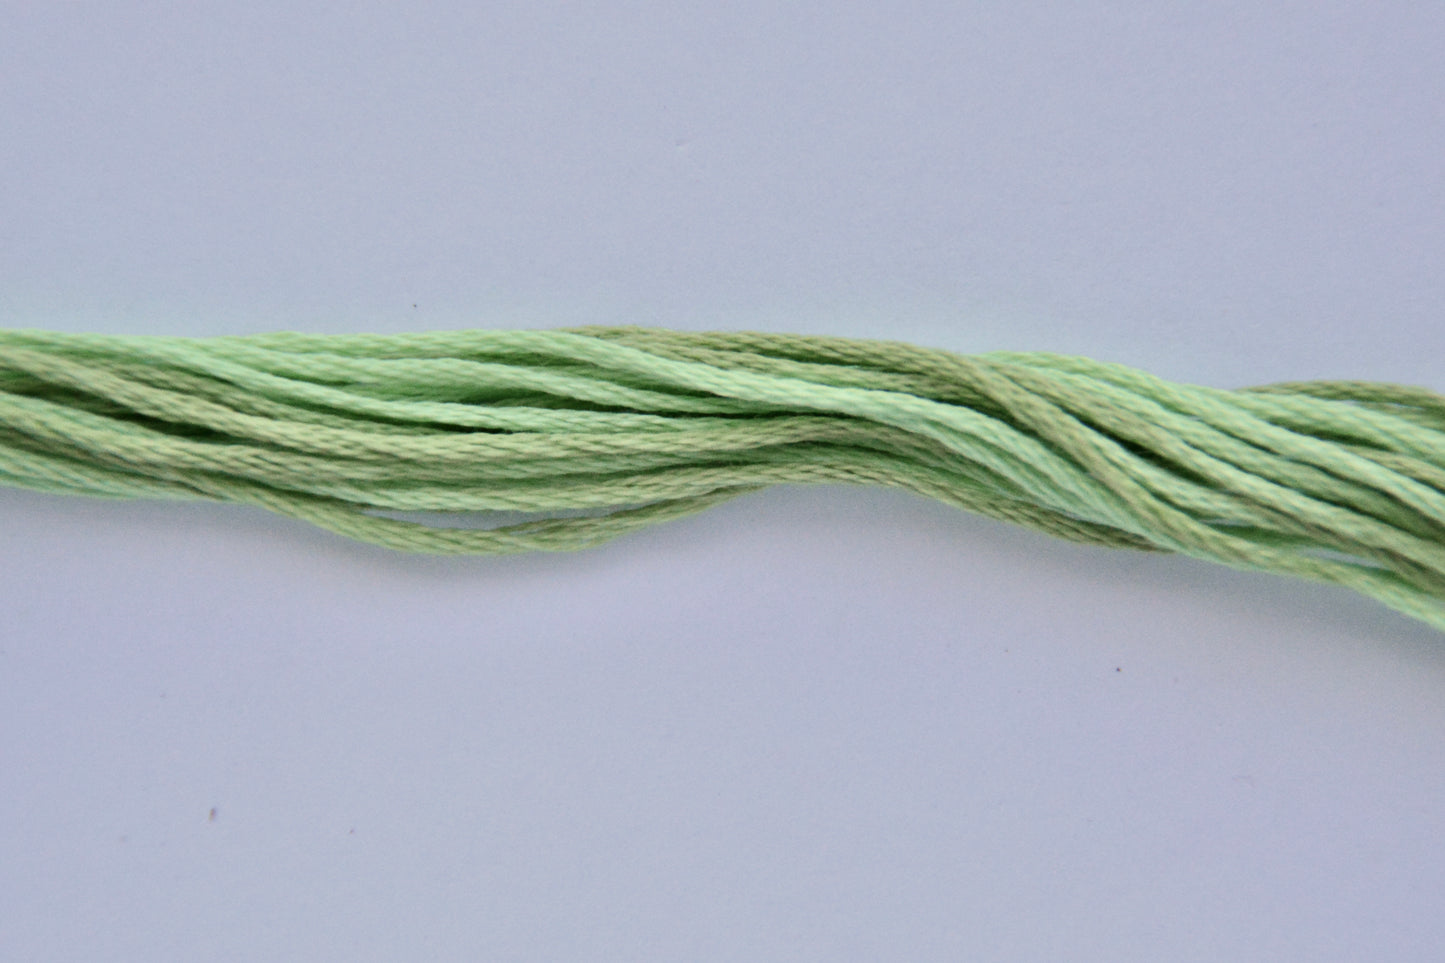 Meadow 2176 Weeks Dye Works 6-Strand Hand-Dyed Embroidery Floss